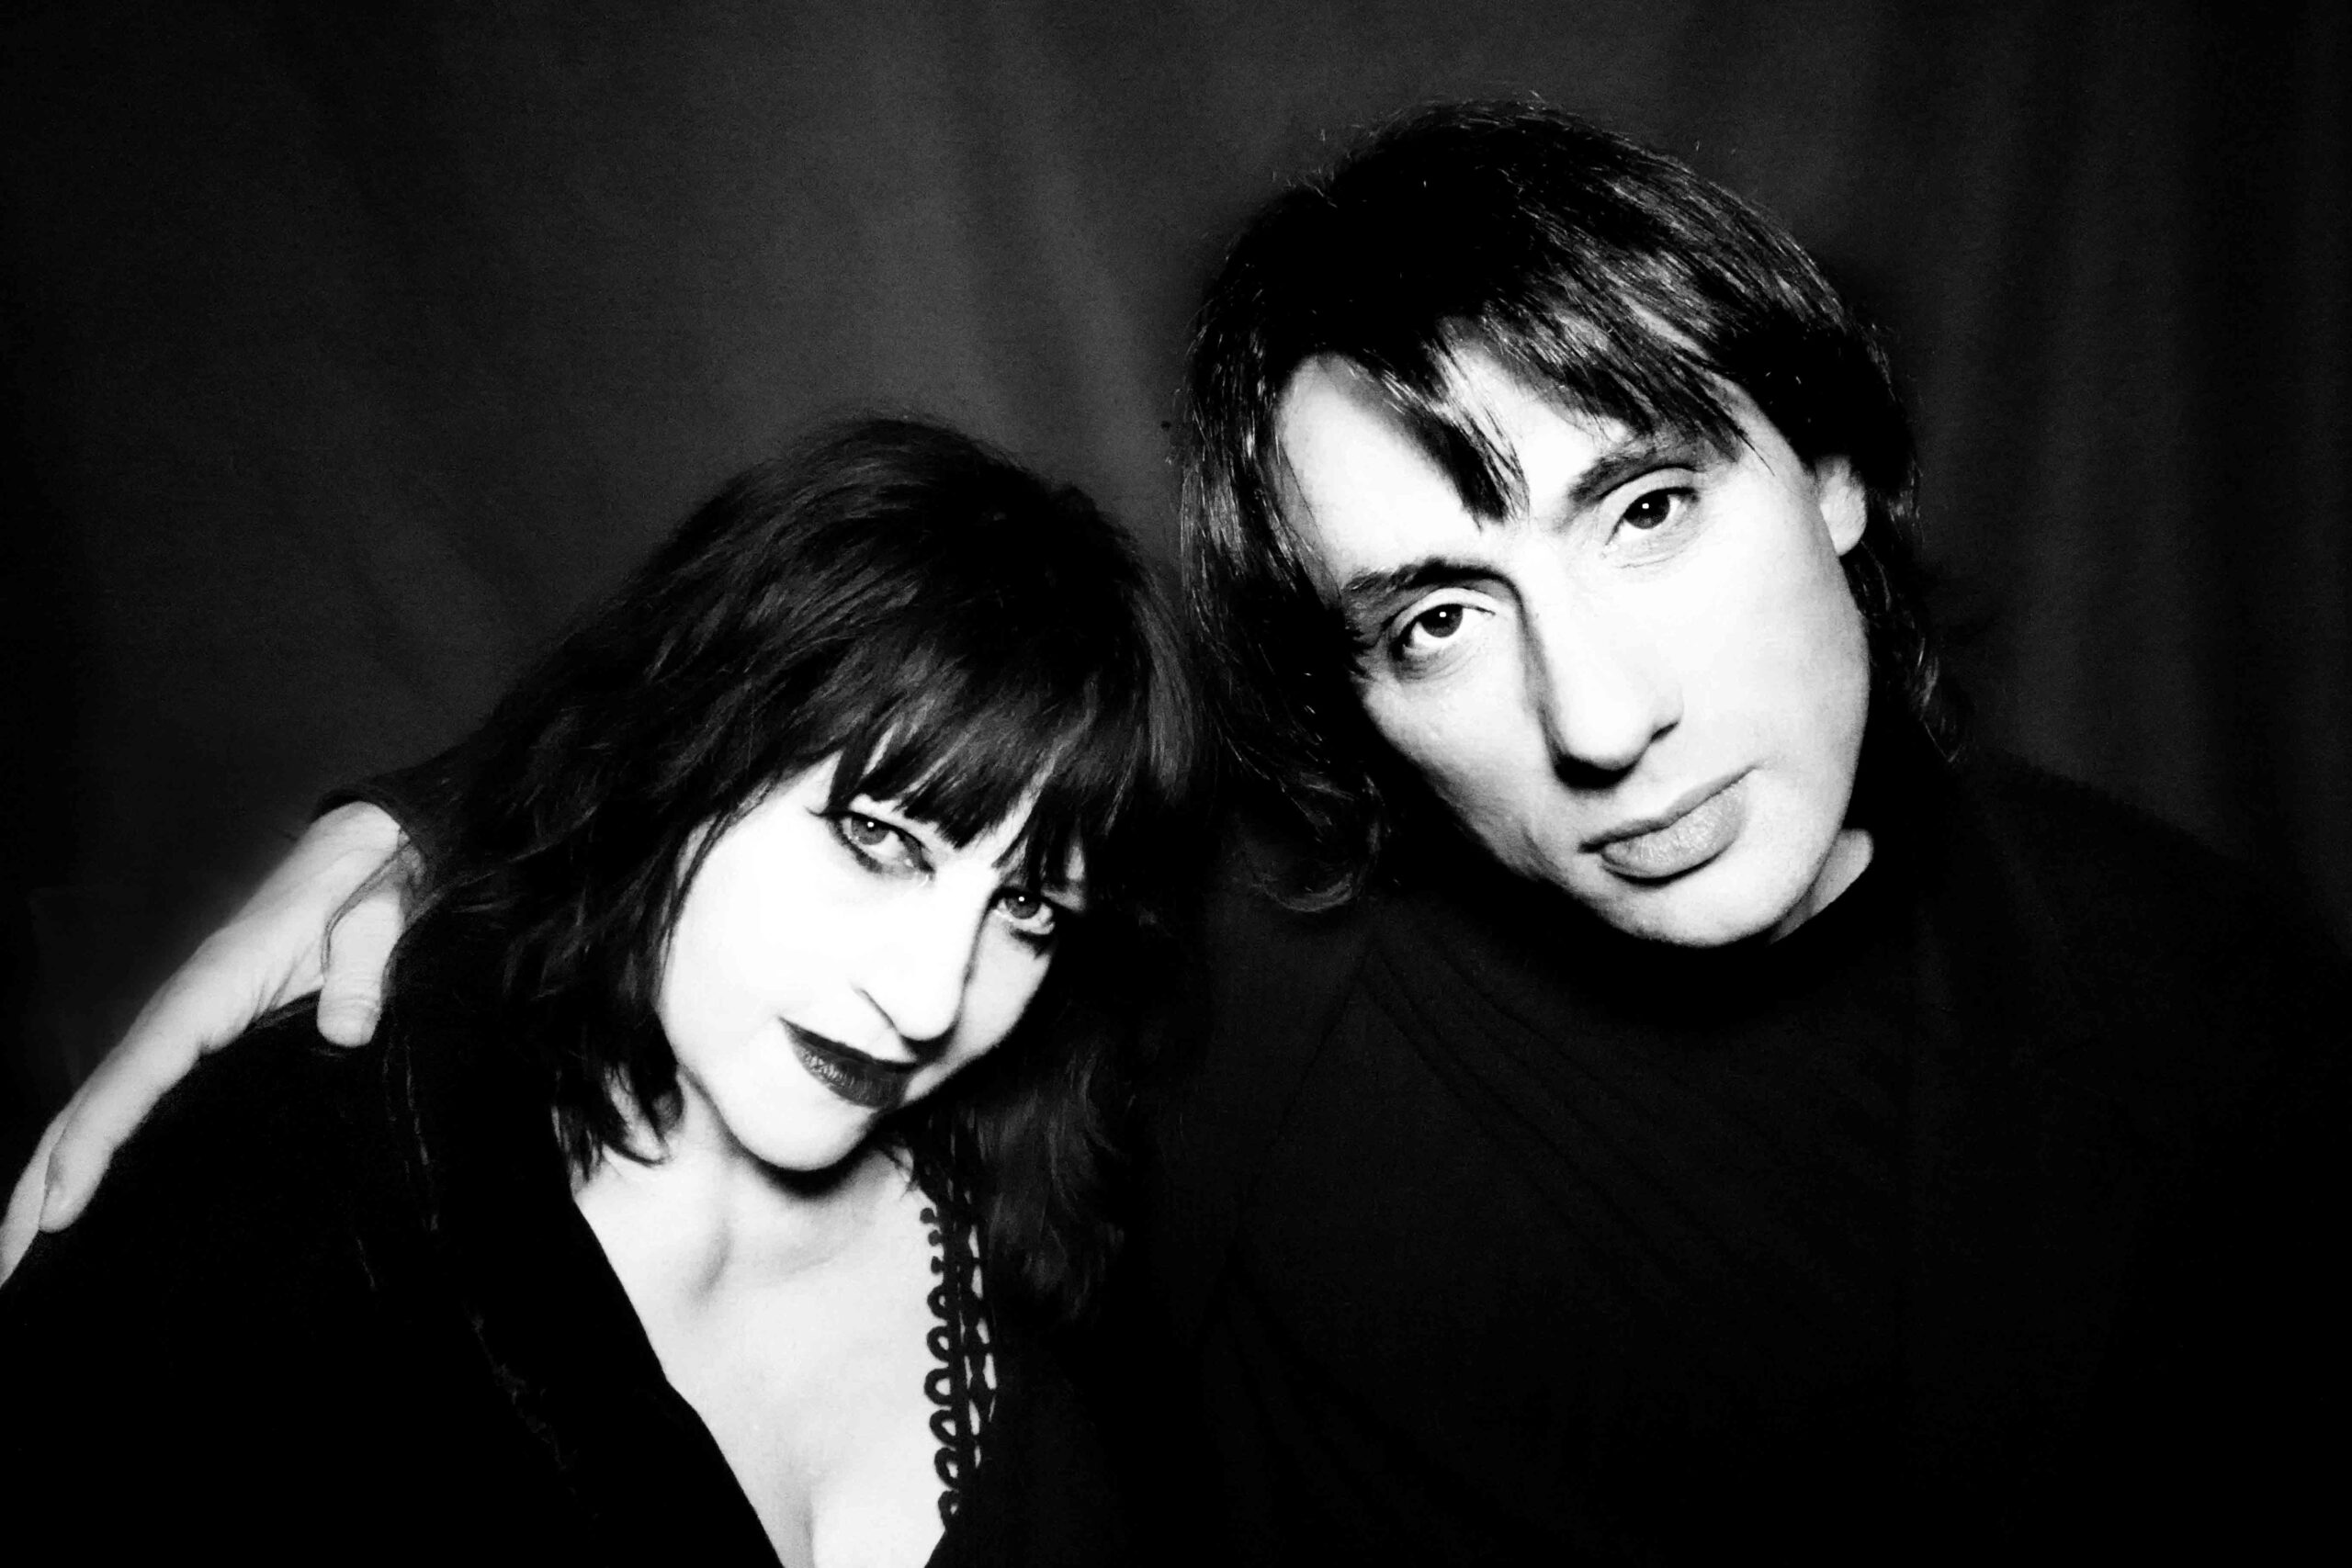 Lydia Lunch and Joseph Keckler posing together.